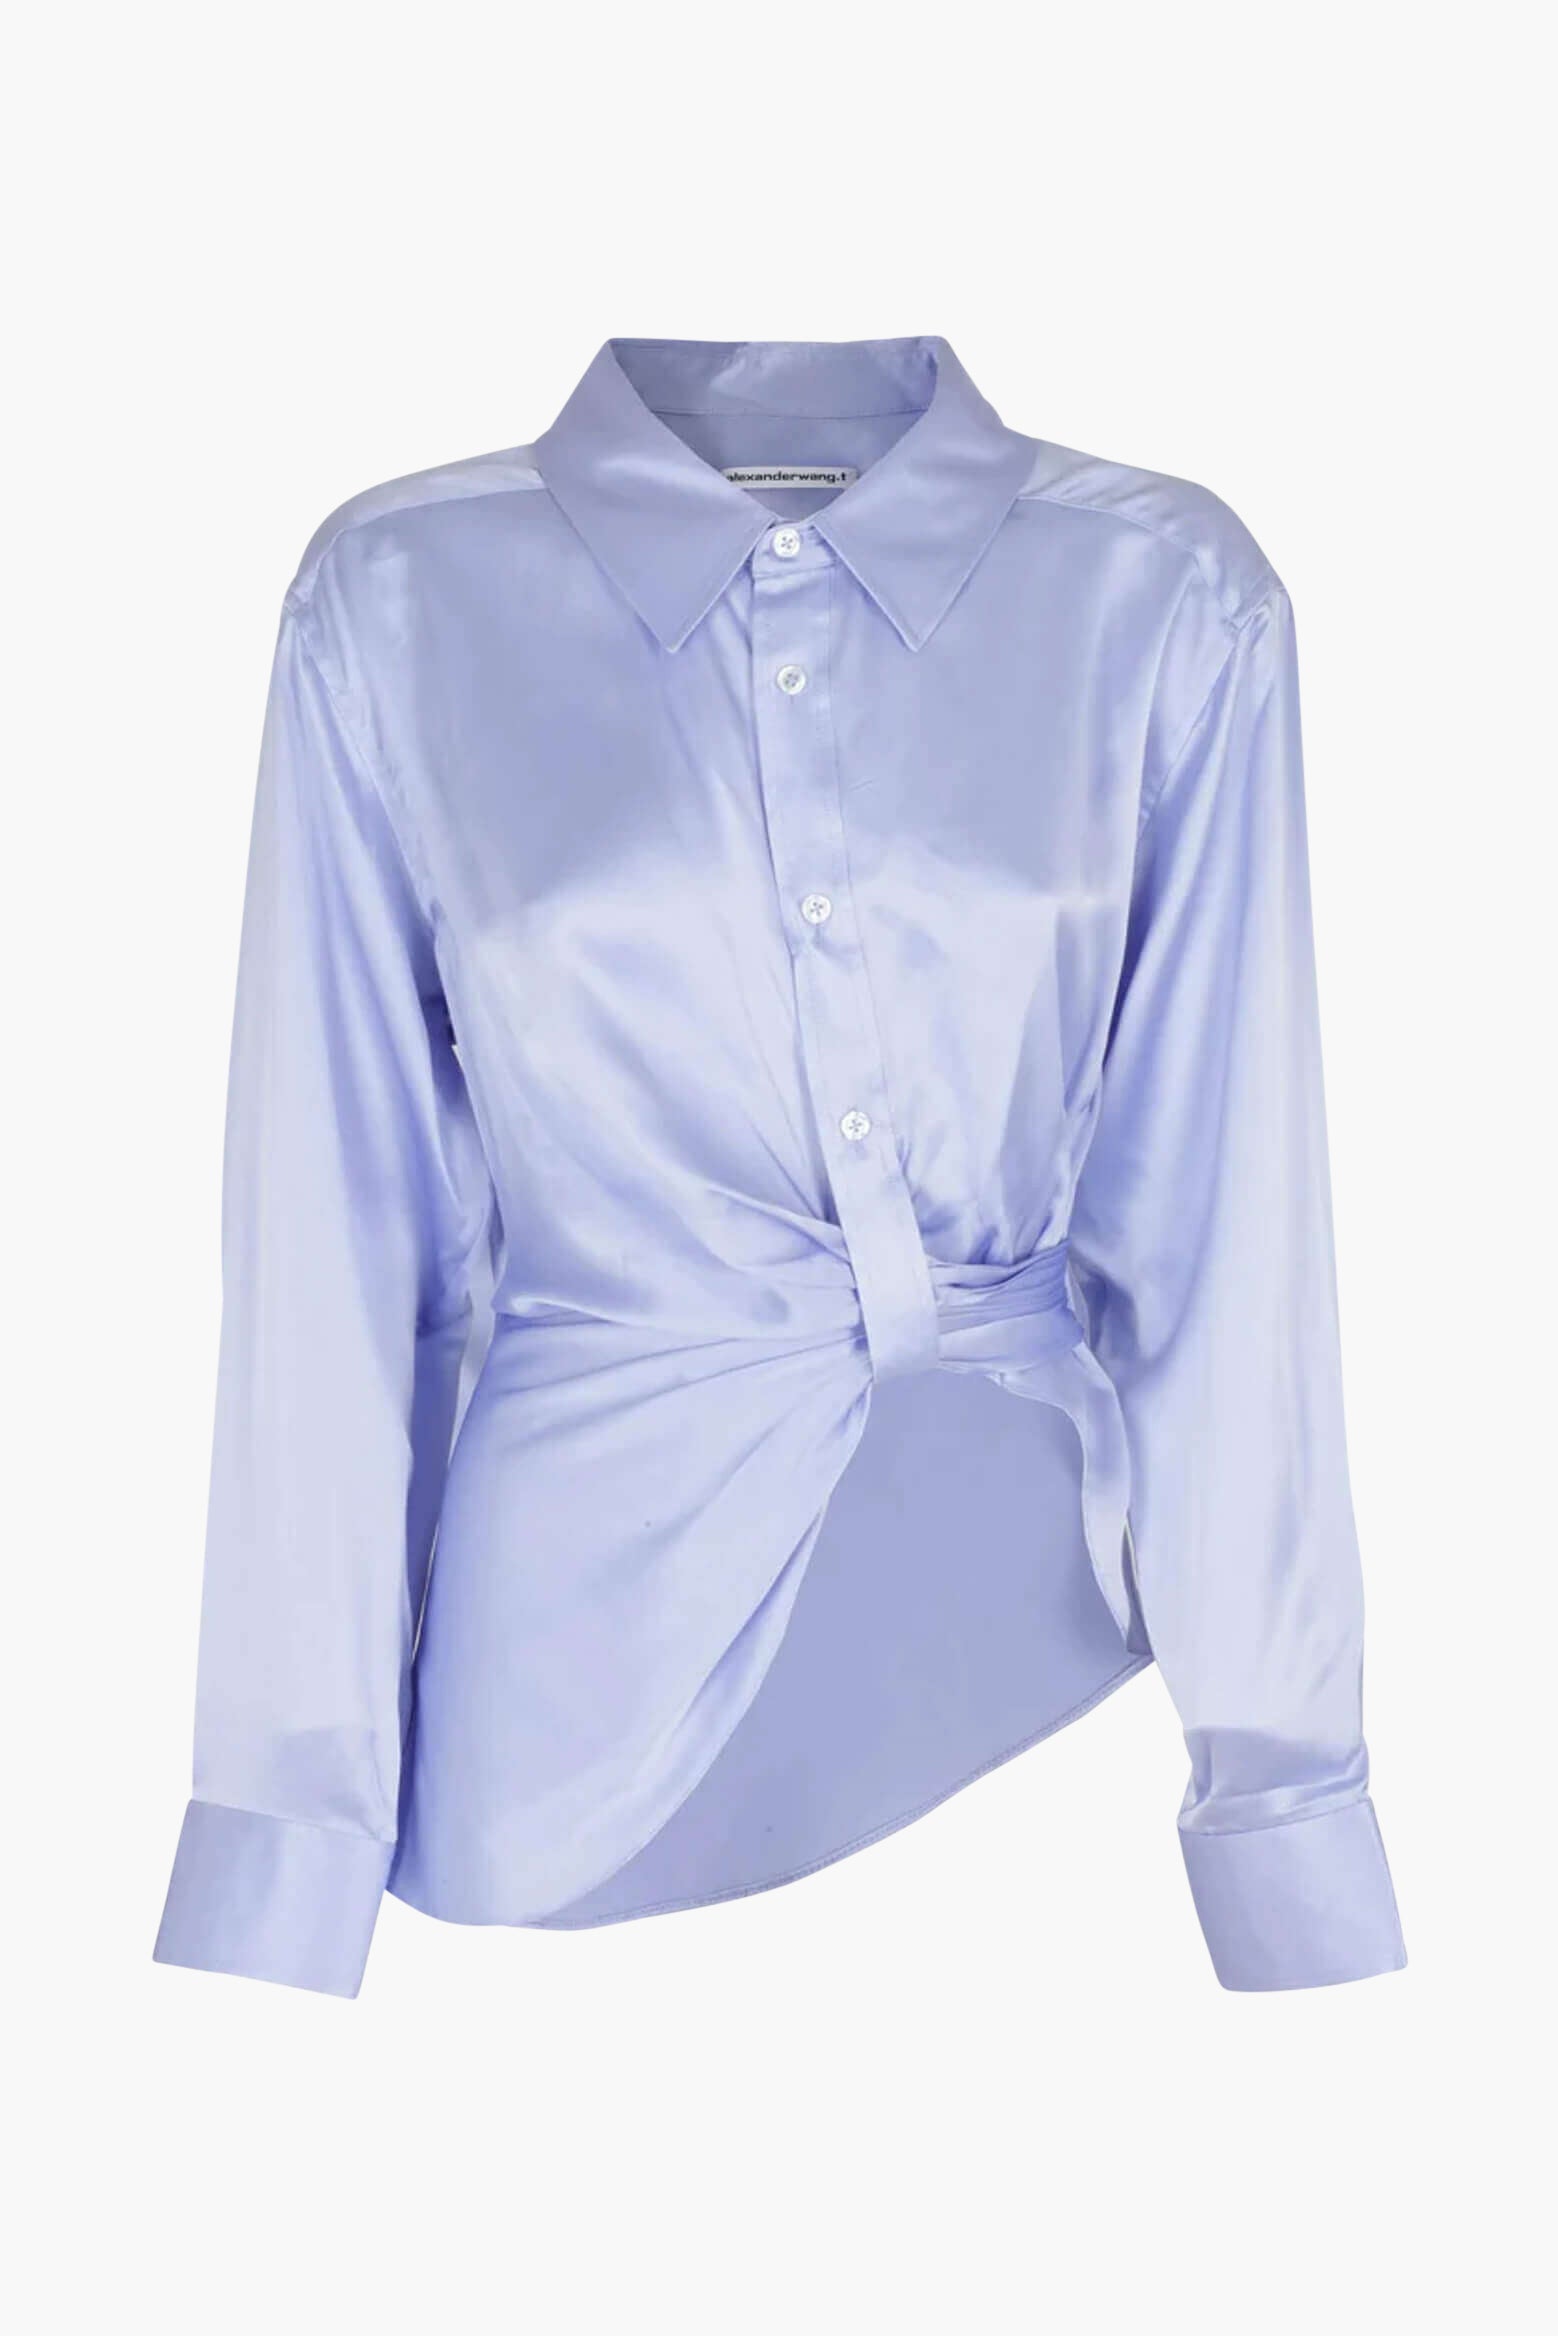 alexanderwang.t Thread Placket Button Up Shirt in Easter Egg from The New Trend